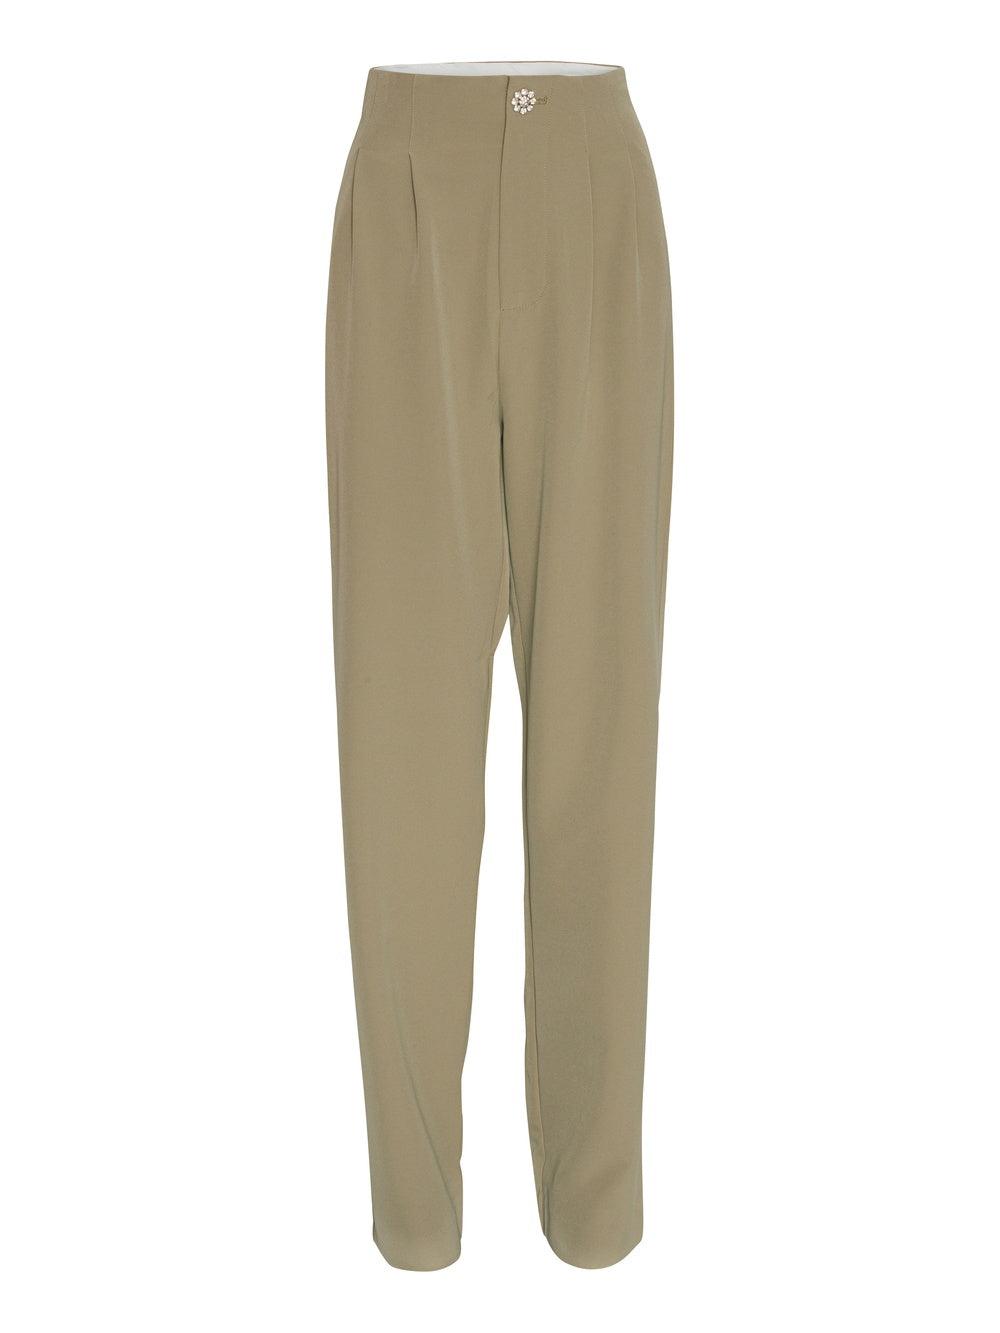 custommade - Prudence Mermaid Green Tailored Trousers - 32 The Guild